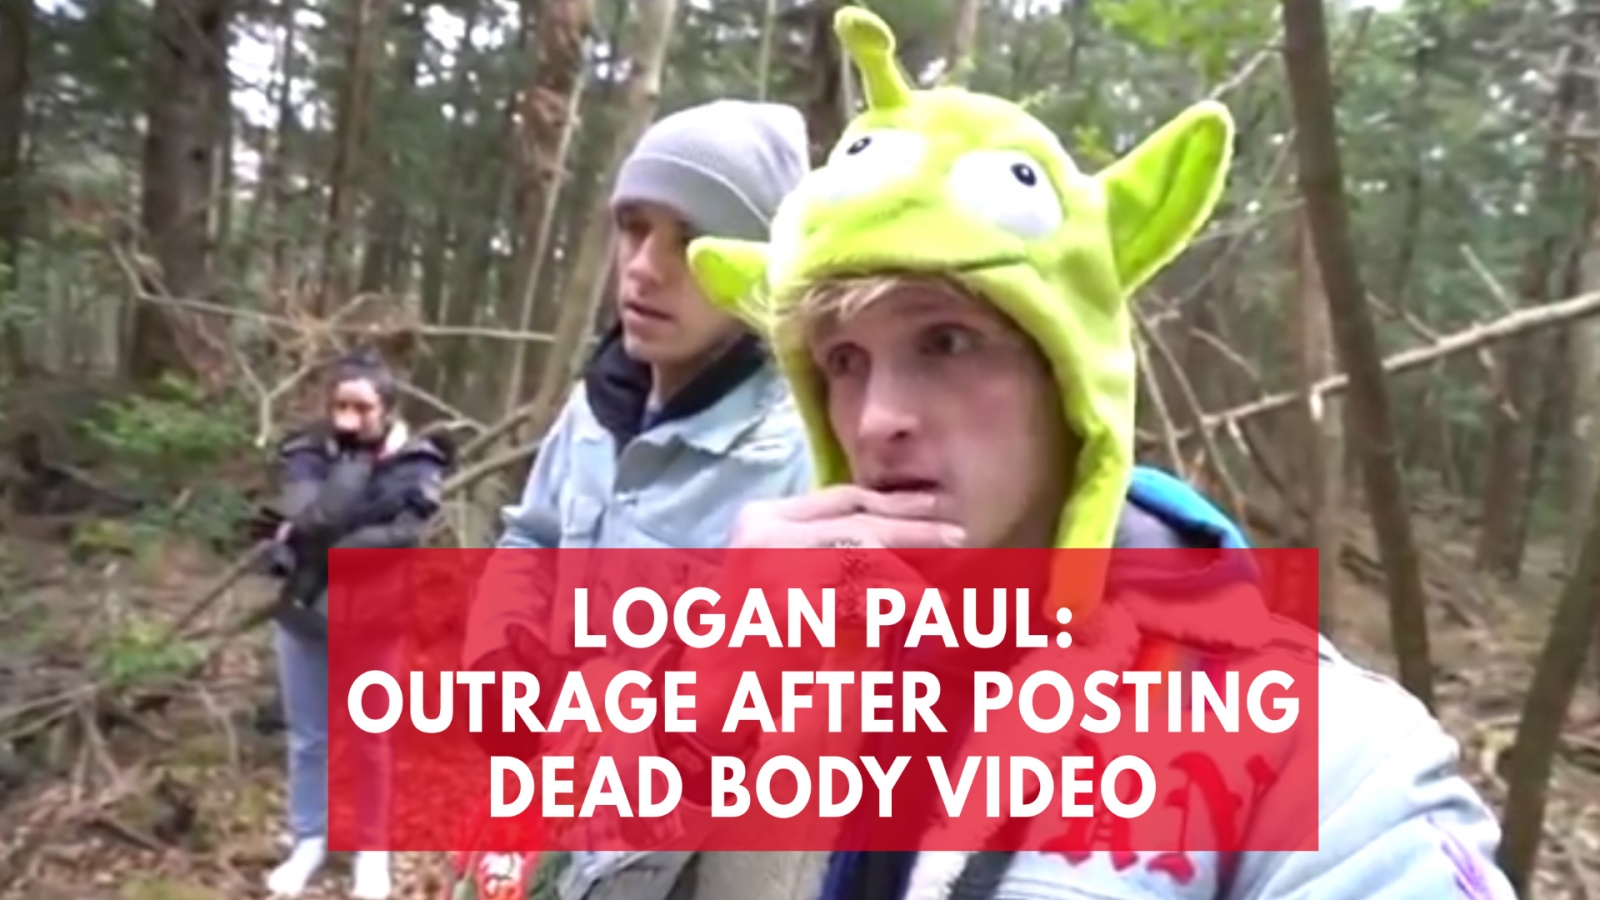 YouTube star Logan Paul under fire for 'we found a dead body' video of